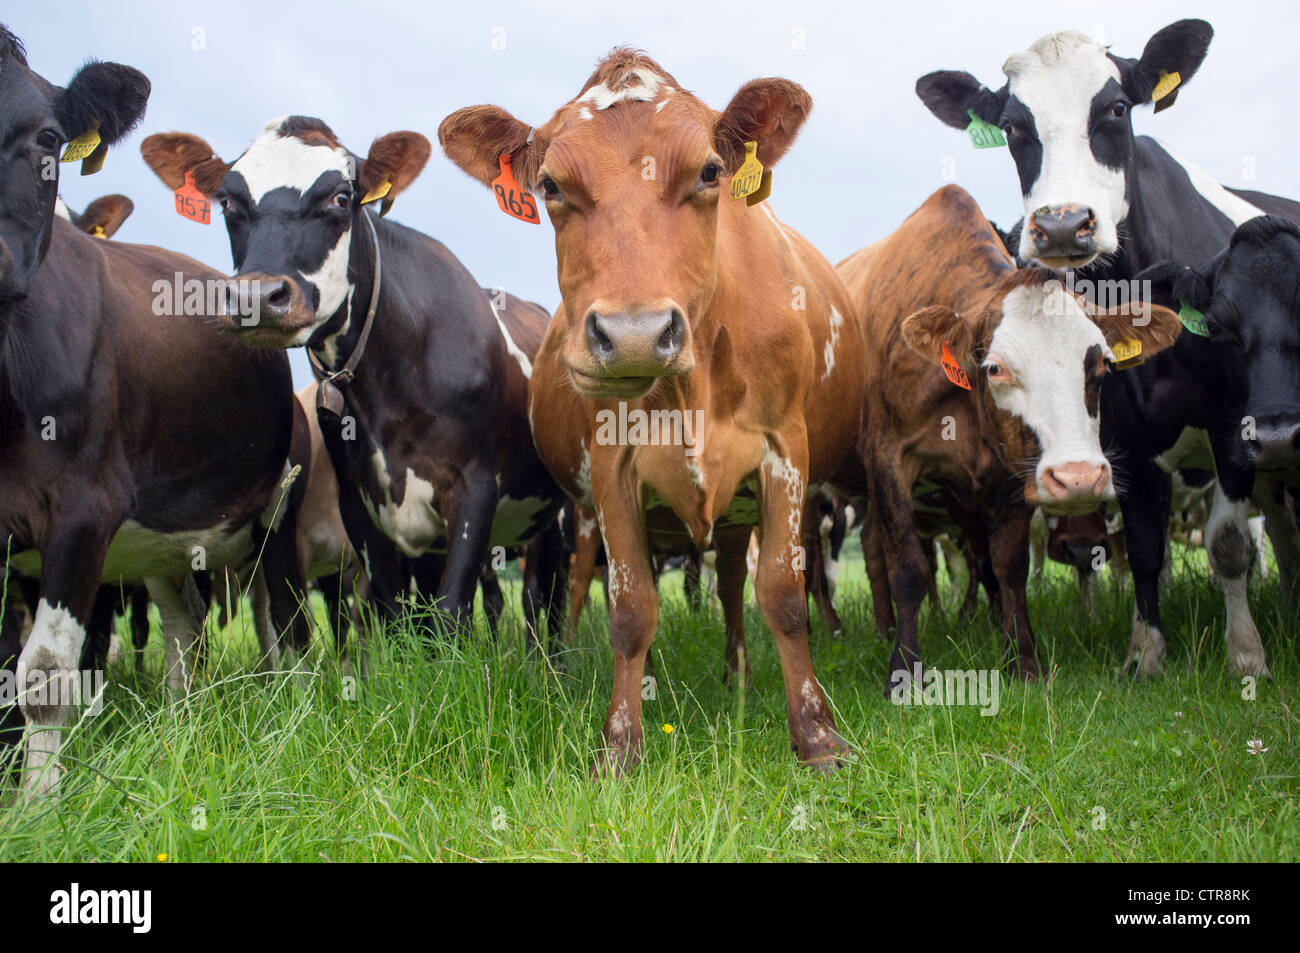 Cows in Field Staring at Camera Stock Photo